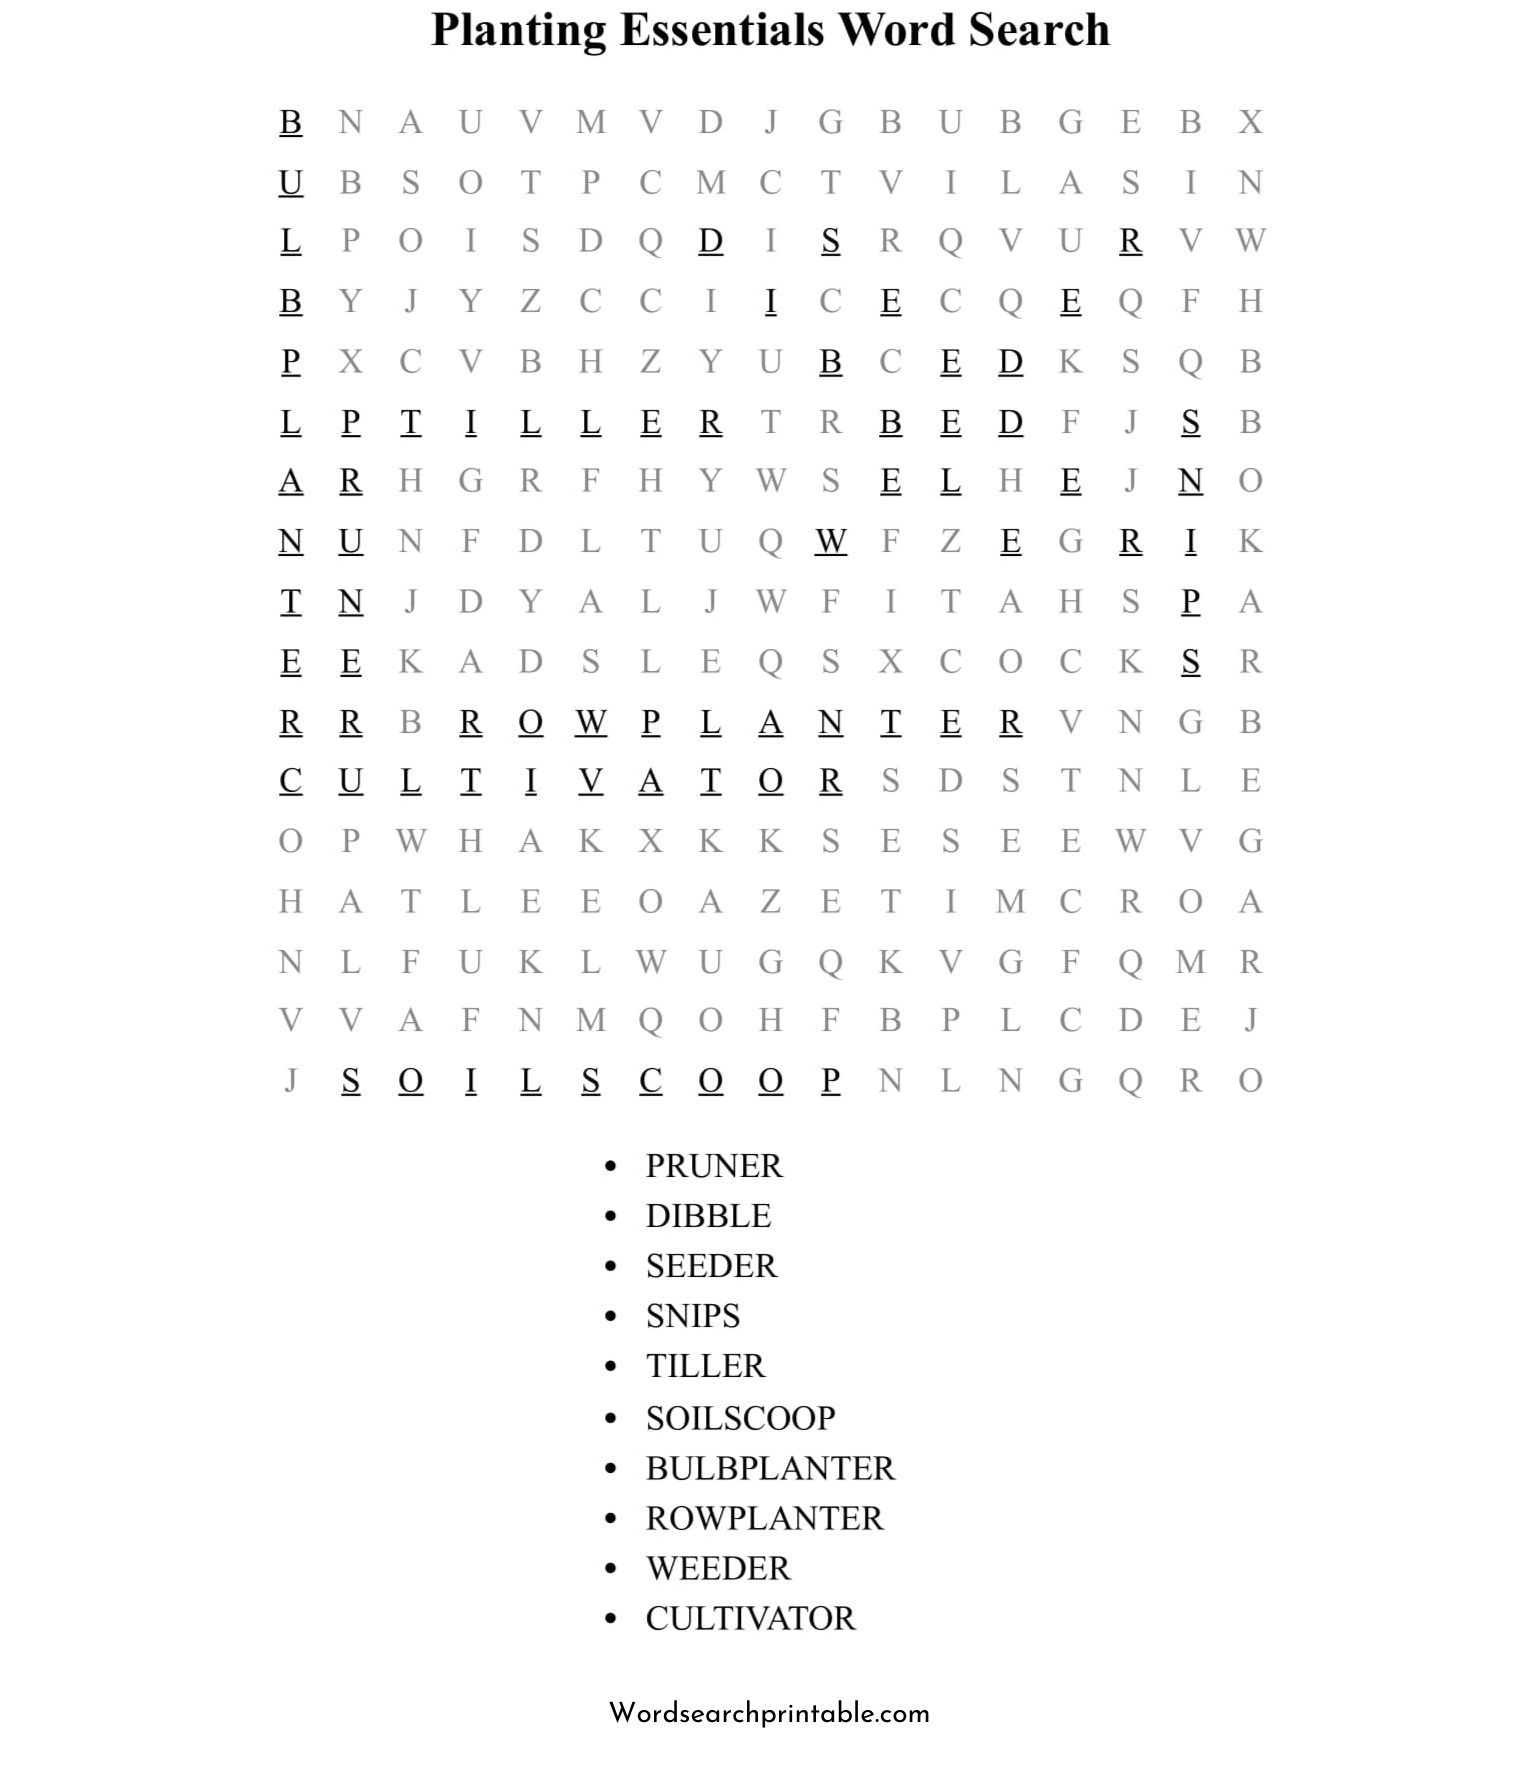 planting essentials word search puzzle solution